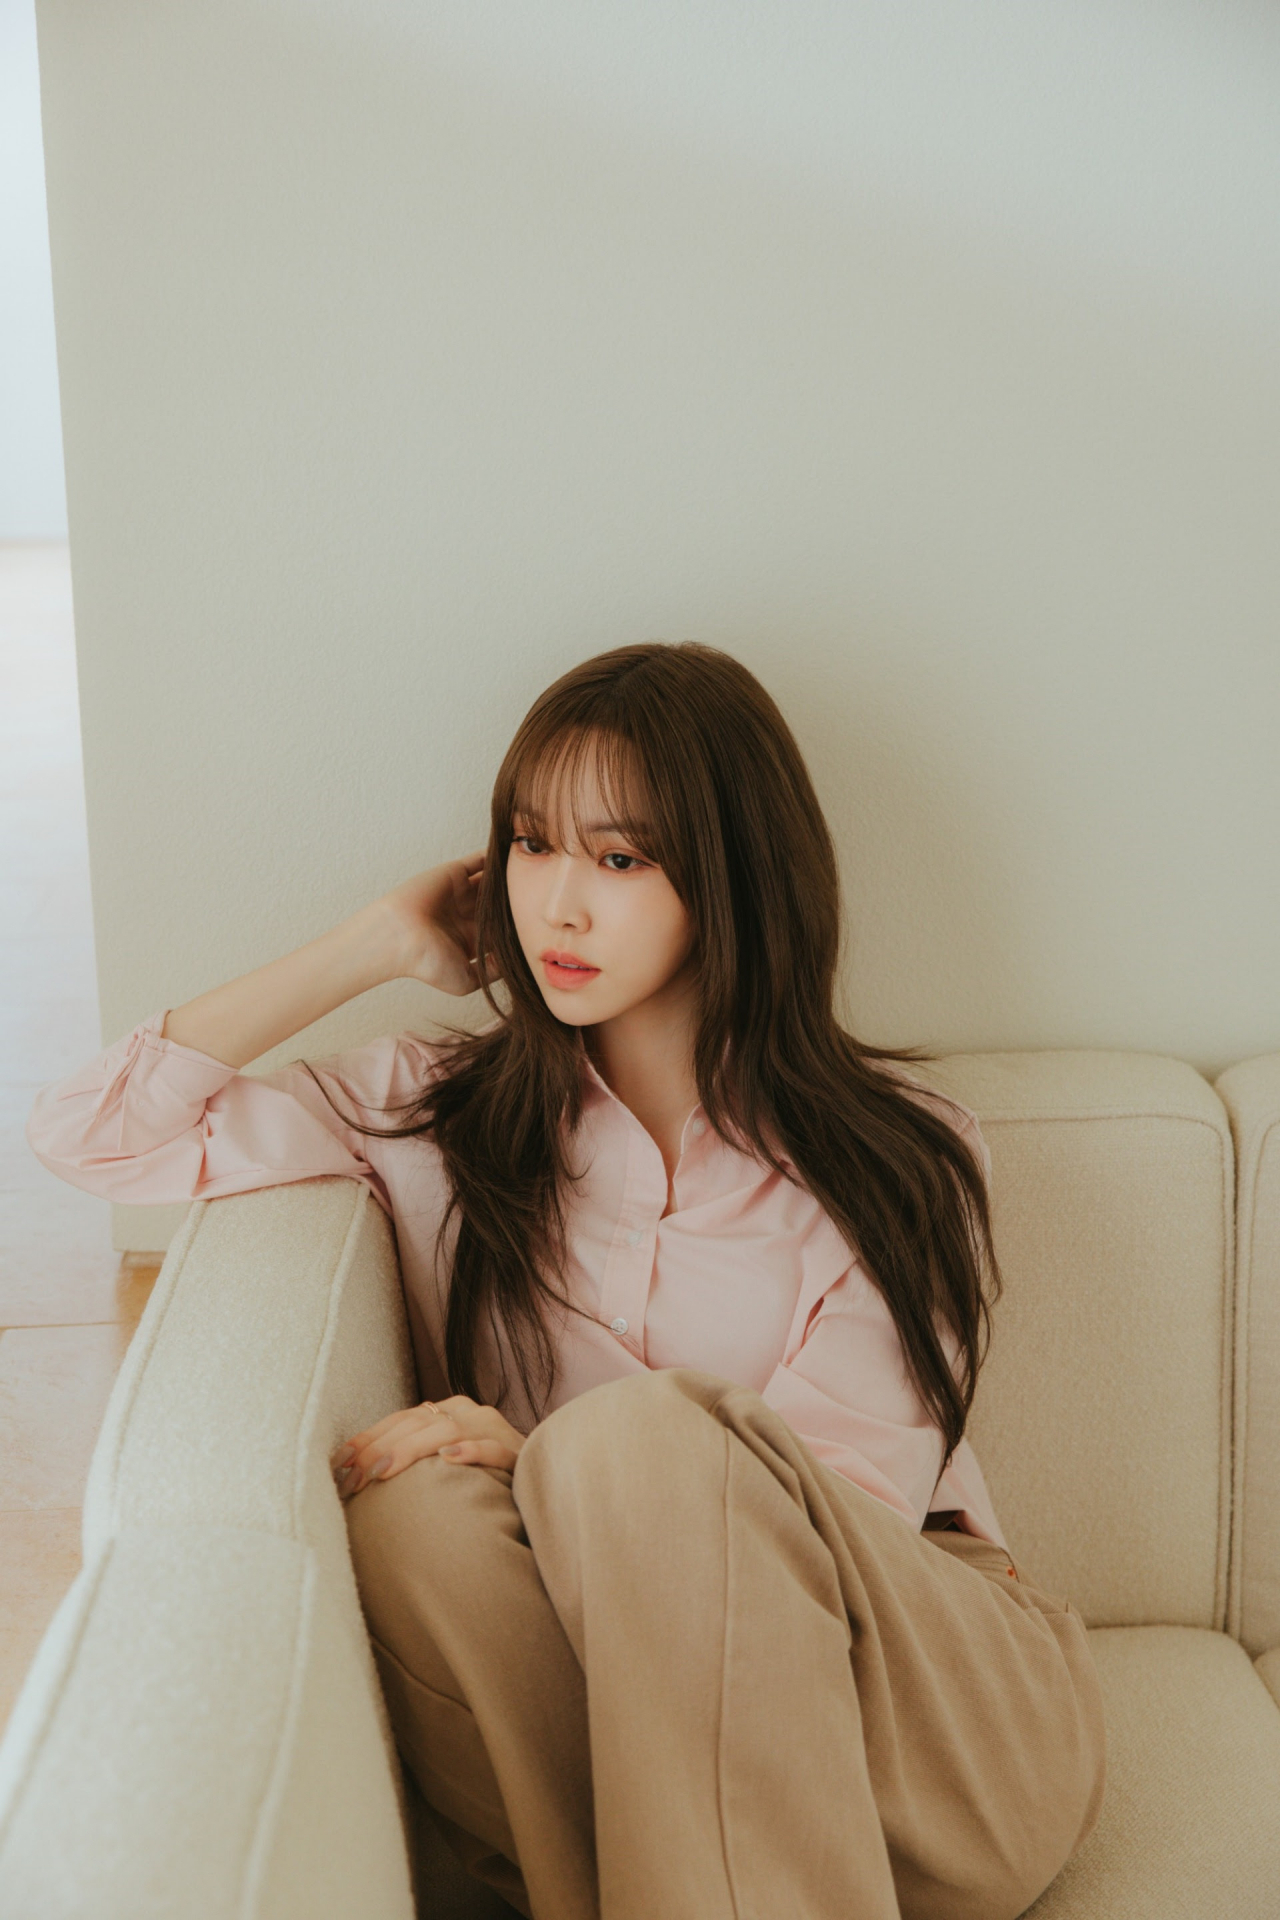 Image of singer Yuju for her second EP 